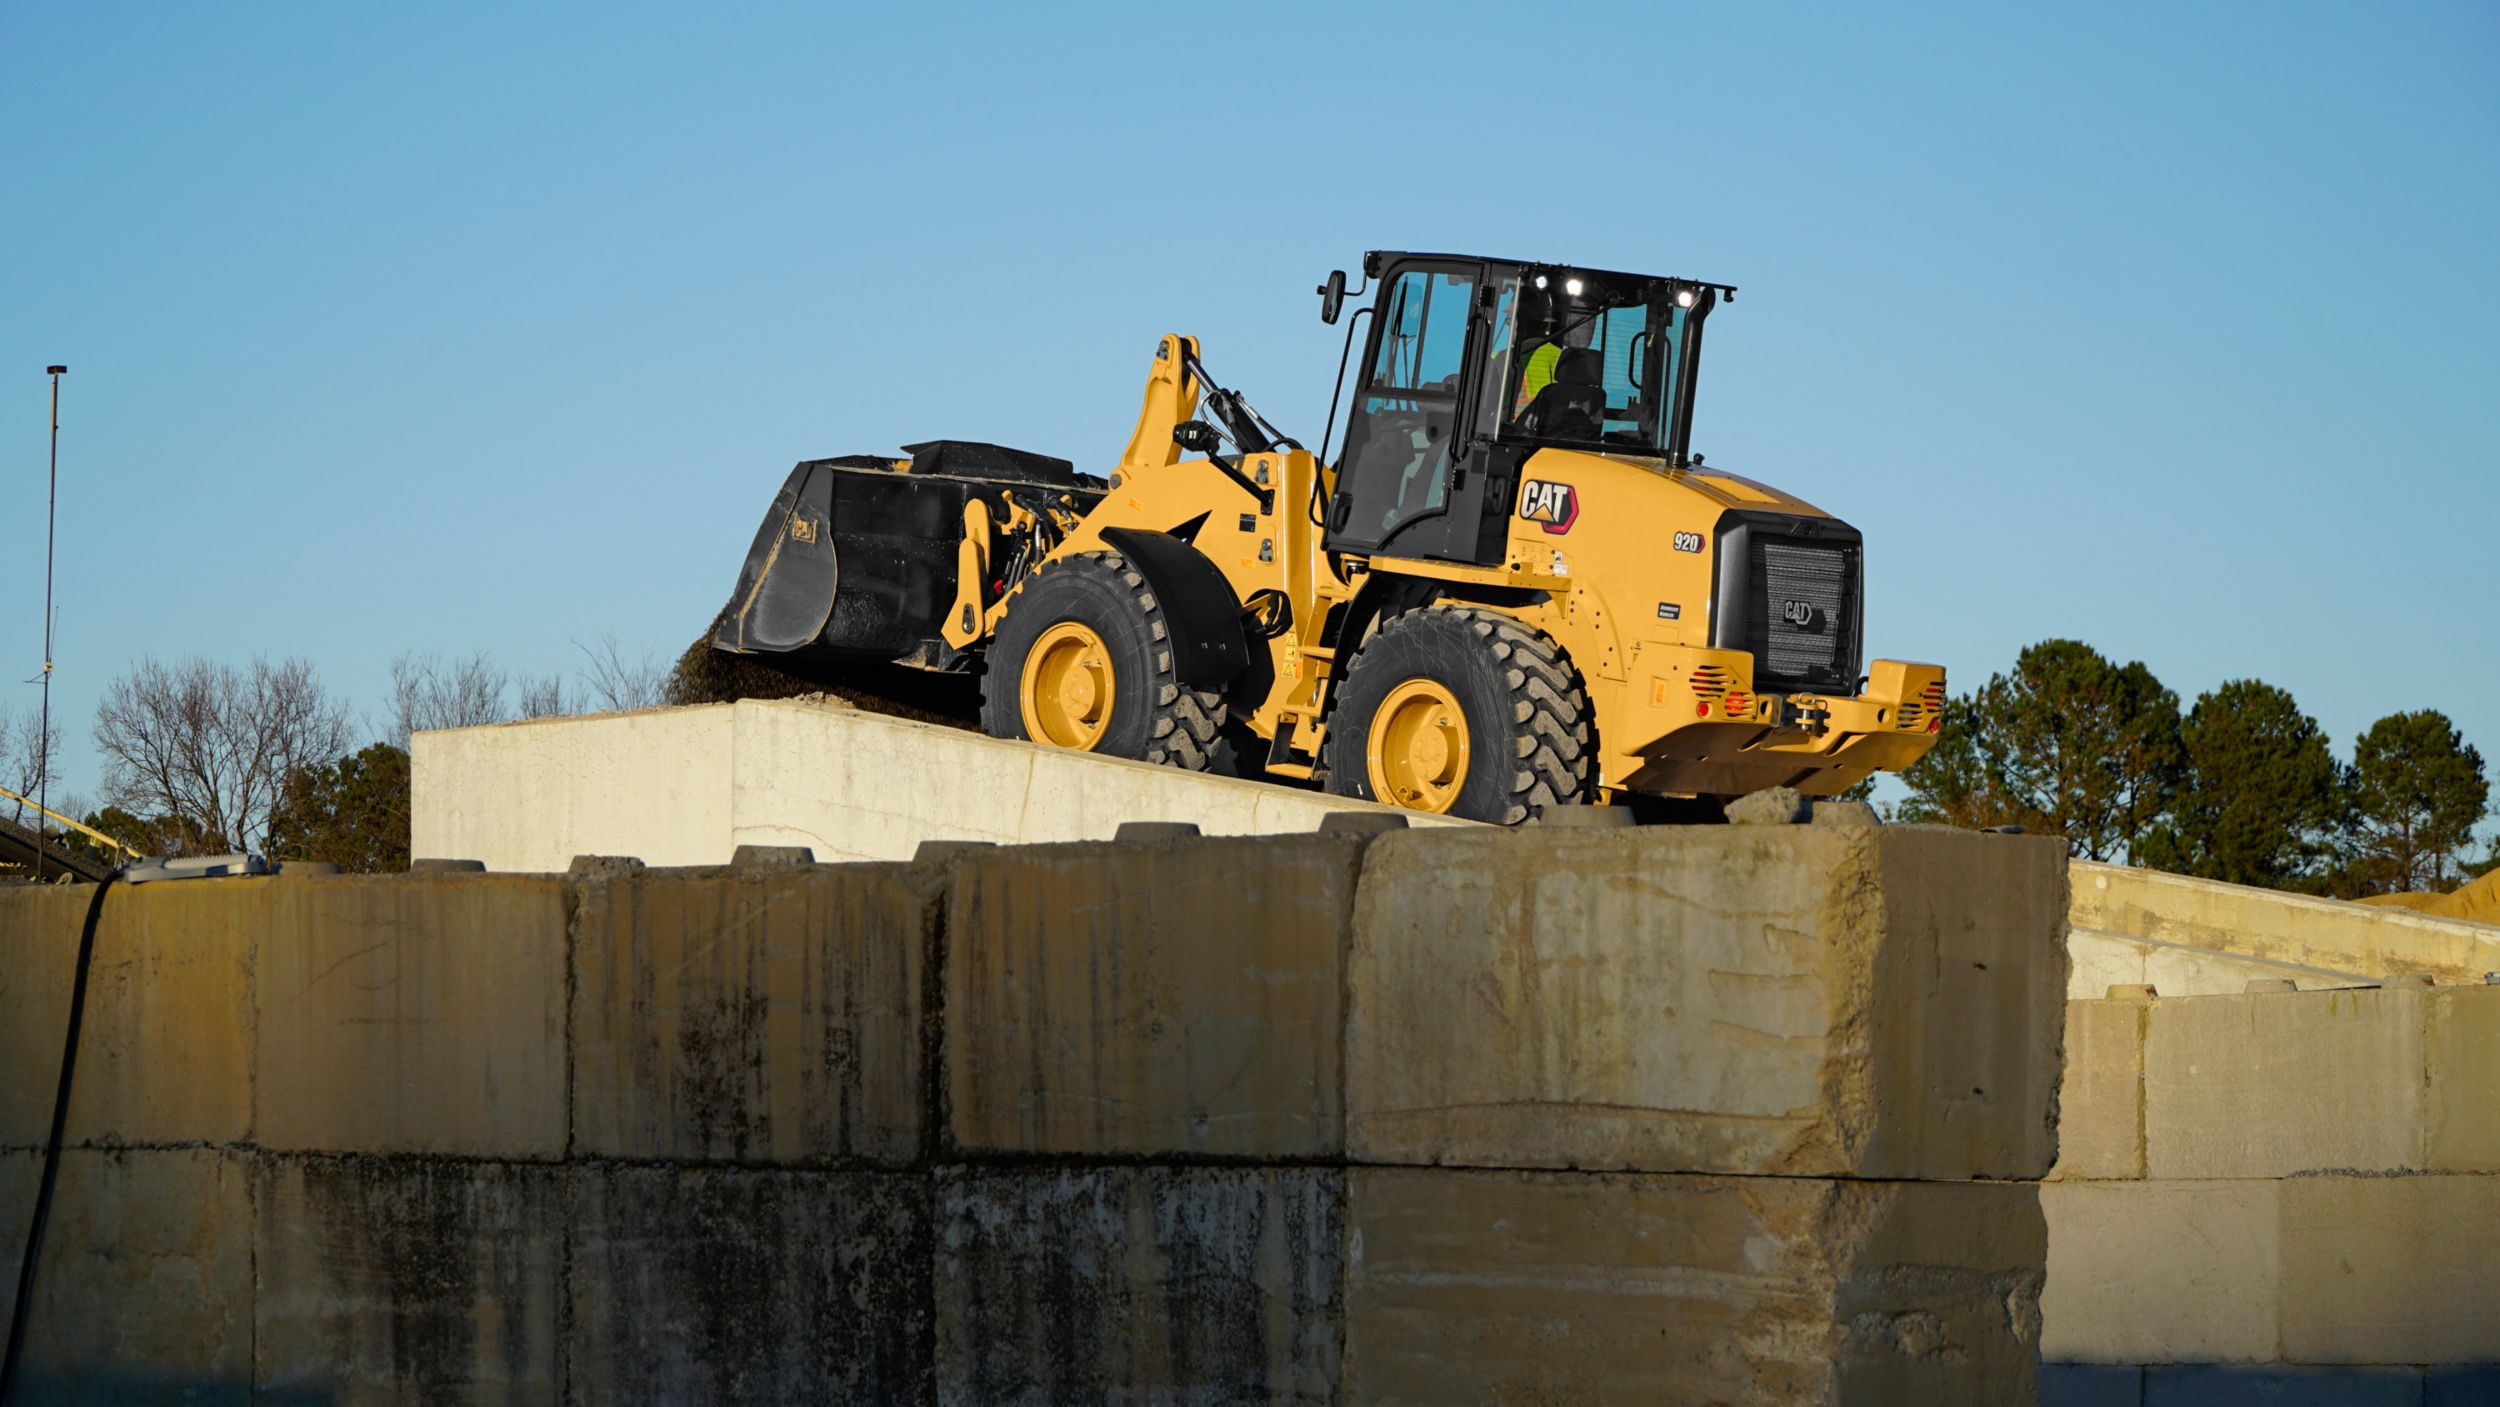 The 920 Compact Wheel Loader.